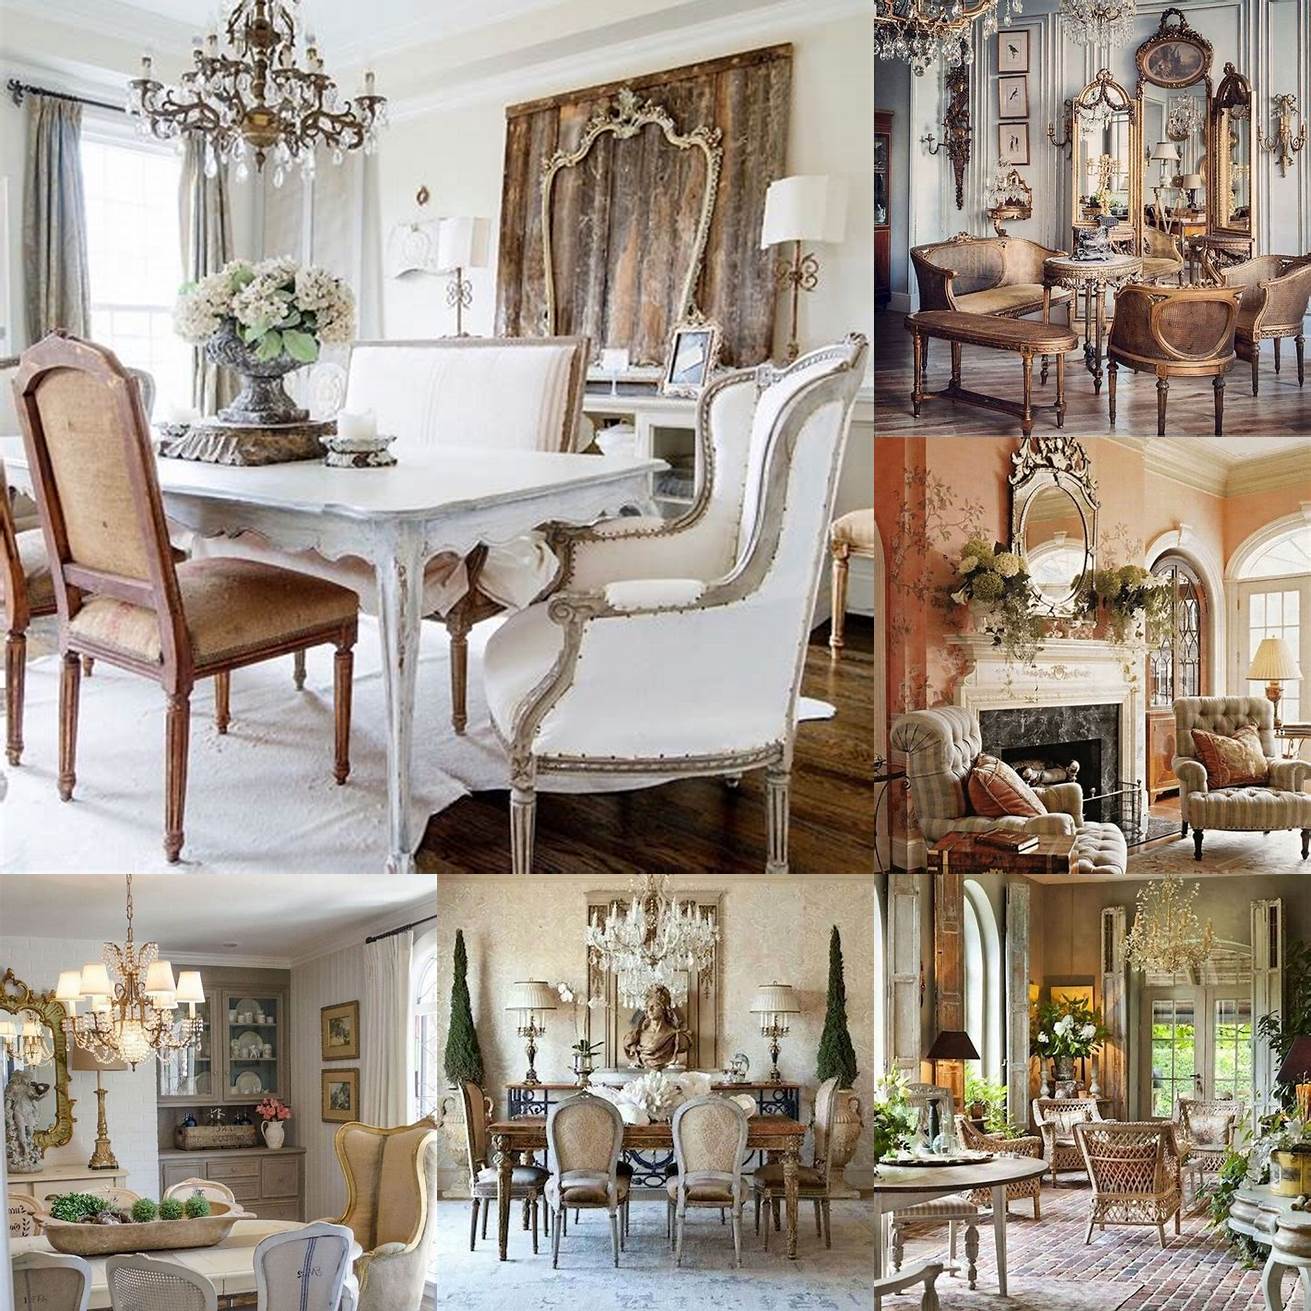 Mix and match French Provincial furniture with other styles to create a unique and personalized look